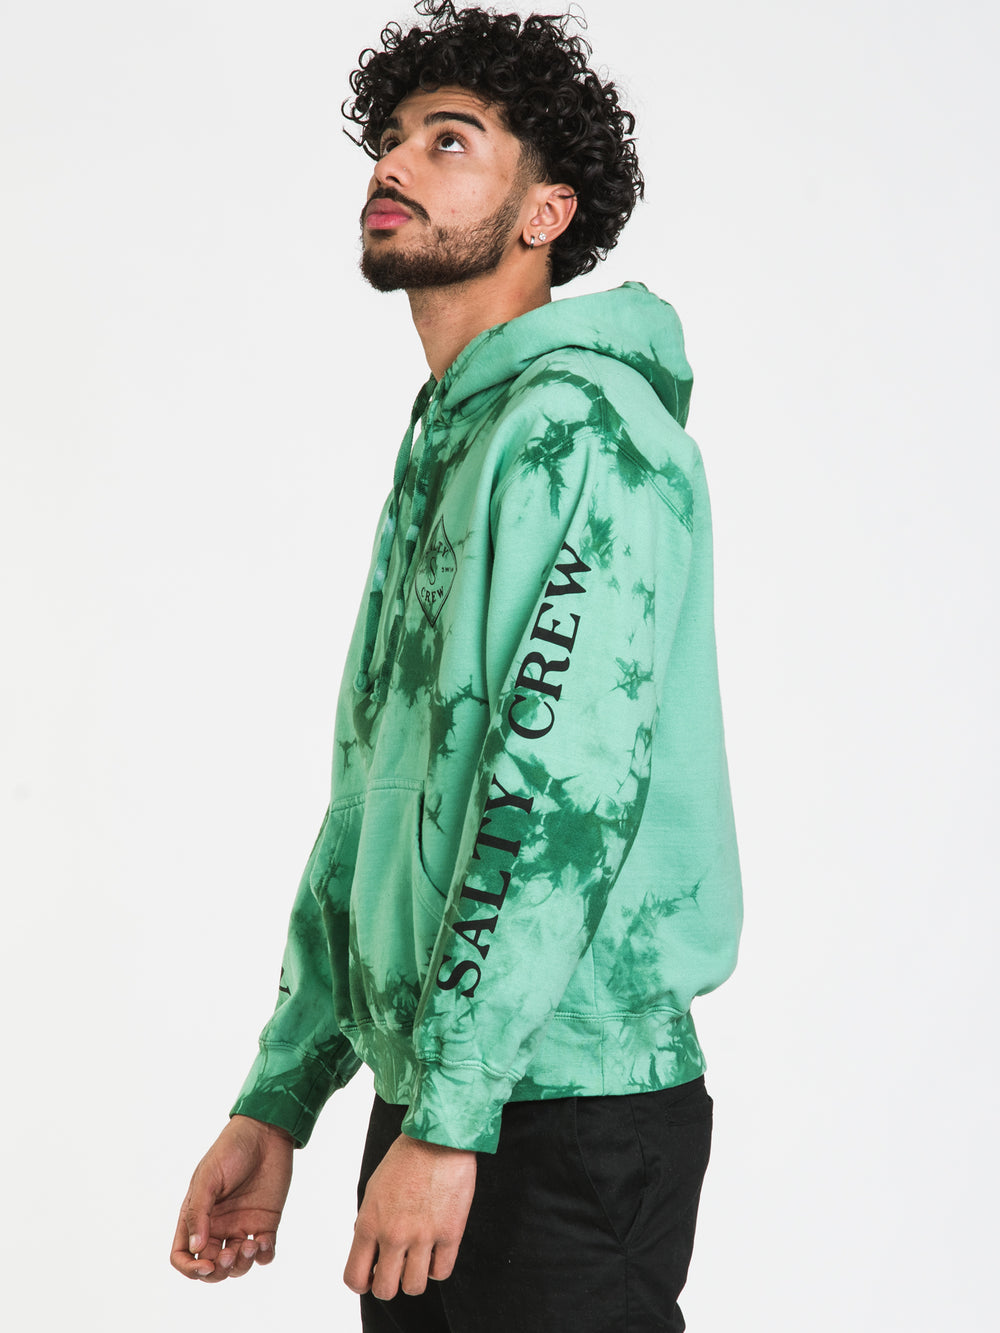 SALTY CREW TIPPET TIE DYE PULL OVER HOODIE - CLEARANCE